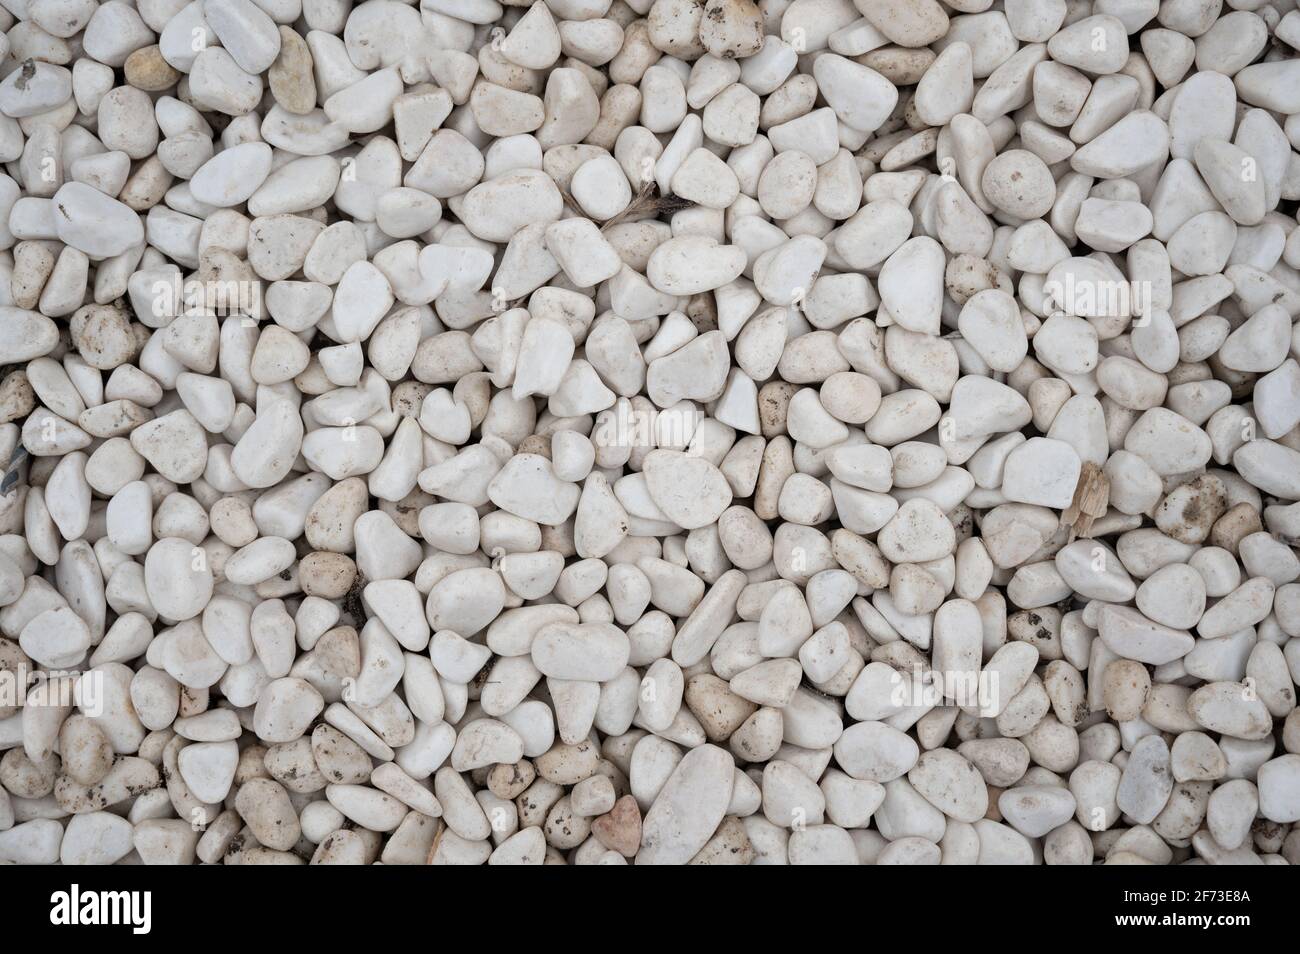 Stone pebbles - white and gray gravel texture background for decoration. Stock Photo